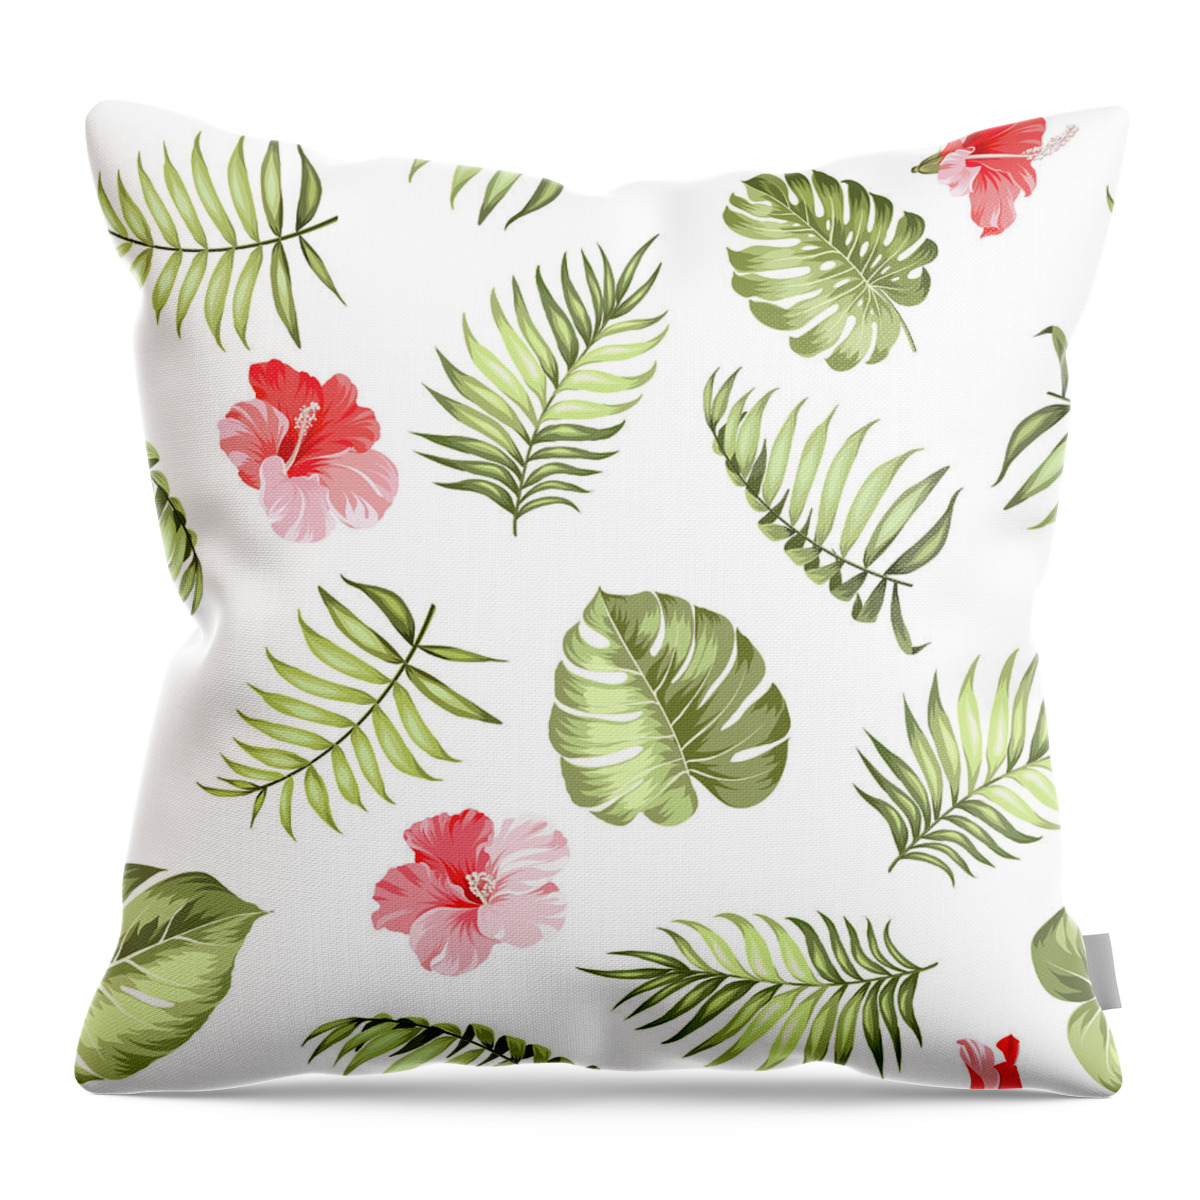 Tropical Rainforest Throw Pillow featuring the digital art Topical Palm Leaves Pattern by Kotkoa